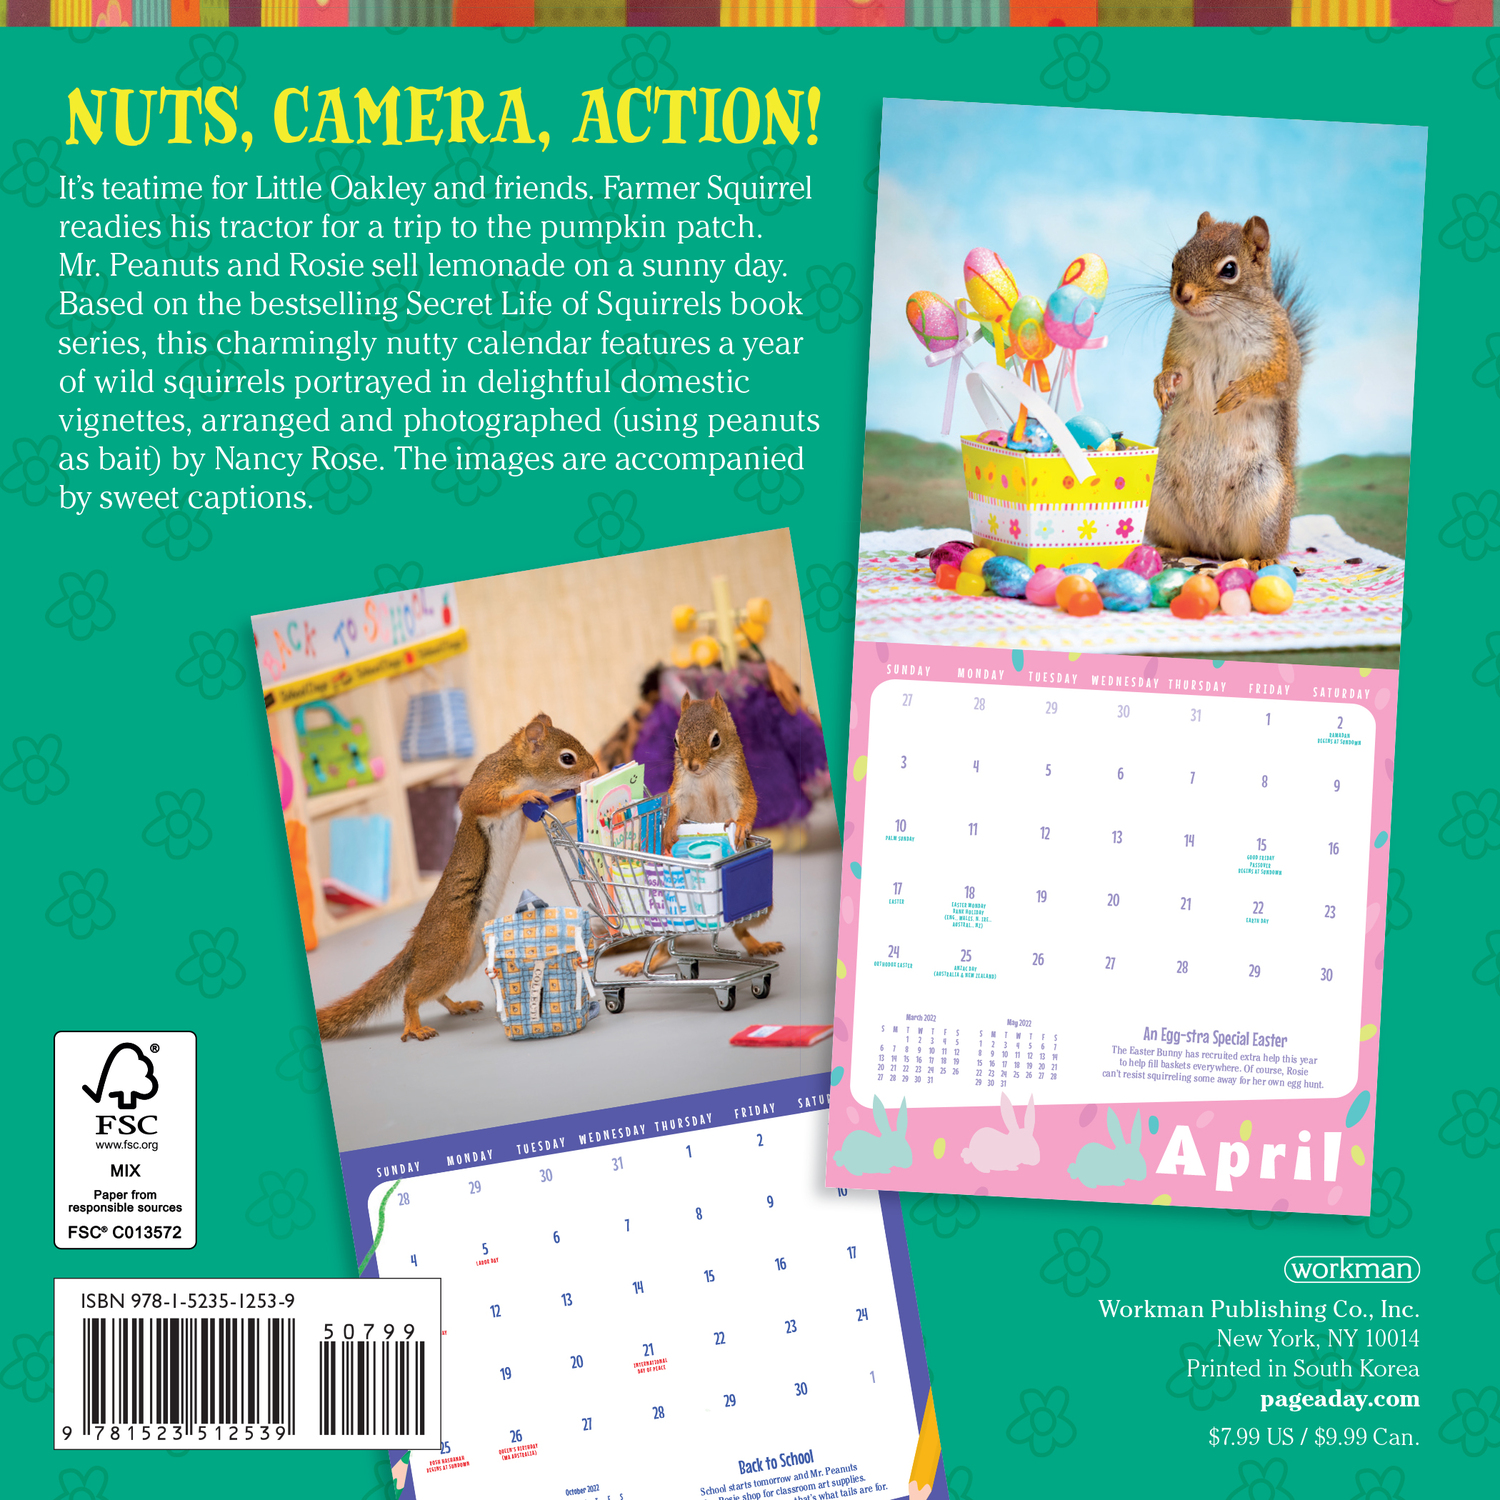 the-secret-life-of-squirrels-mini-wall-calendar-2022-a-year-of-wild-squirrels-portrayed-in